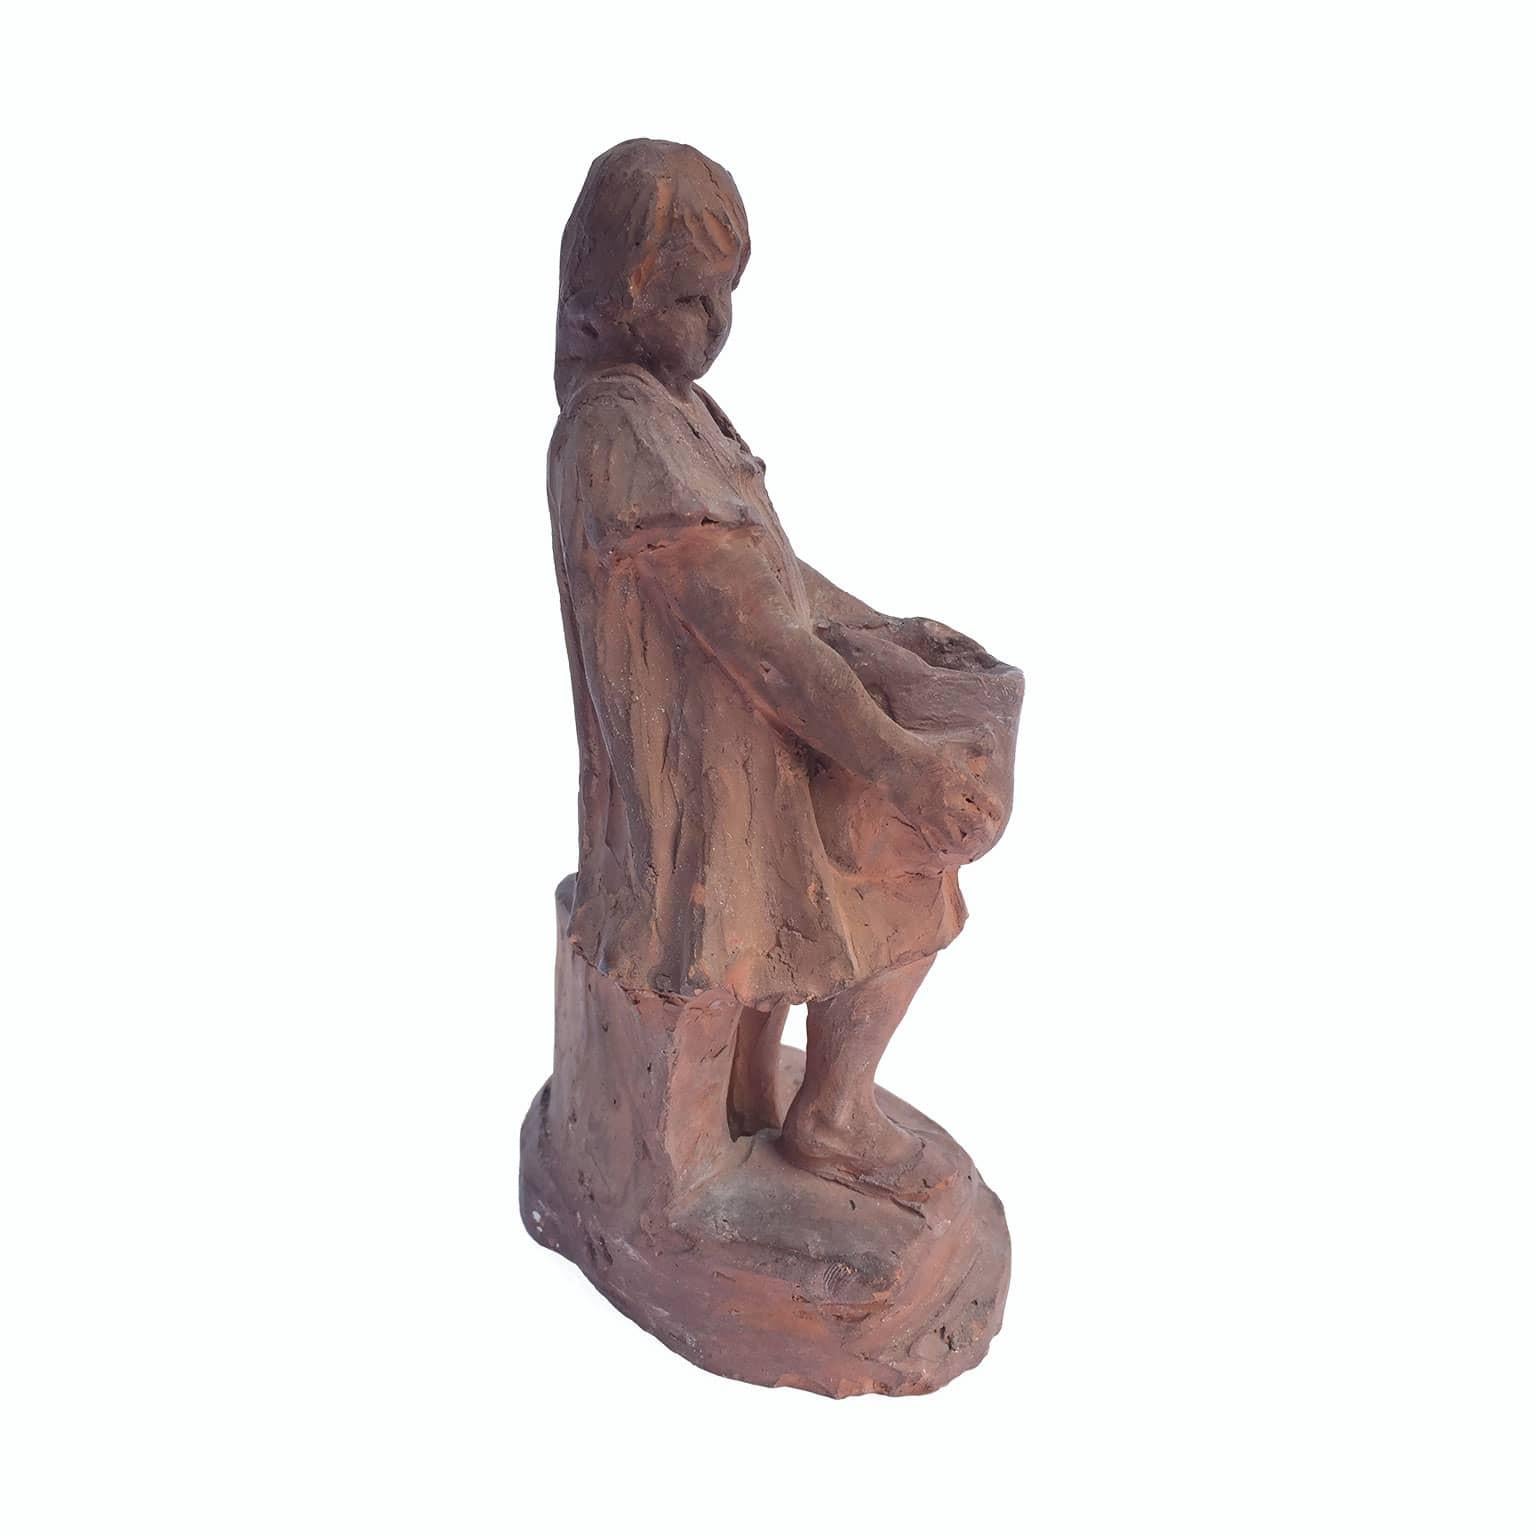 Early 20th Century moulded terracotta sculpture of a young girl with a water pot.

Signed on the base, G. Michieli,  by the Venetian sculptur Guglielmo Michieli (1855-1944). Good age related  condition. Signs of wear, minor chips.
This artwork is